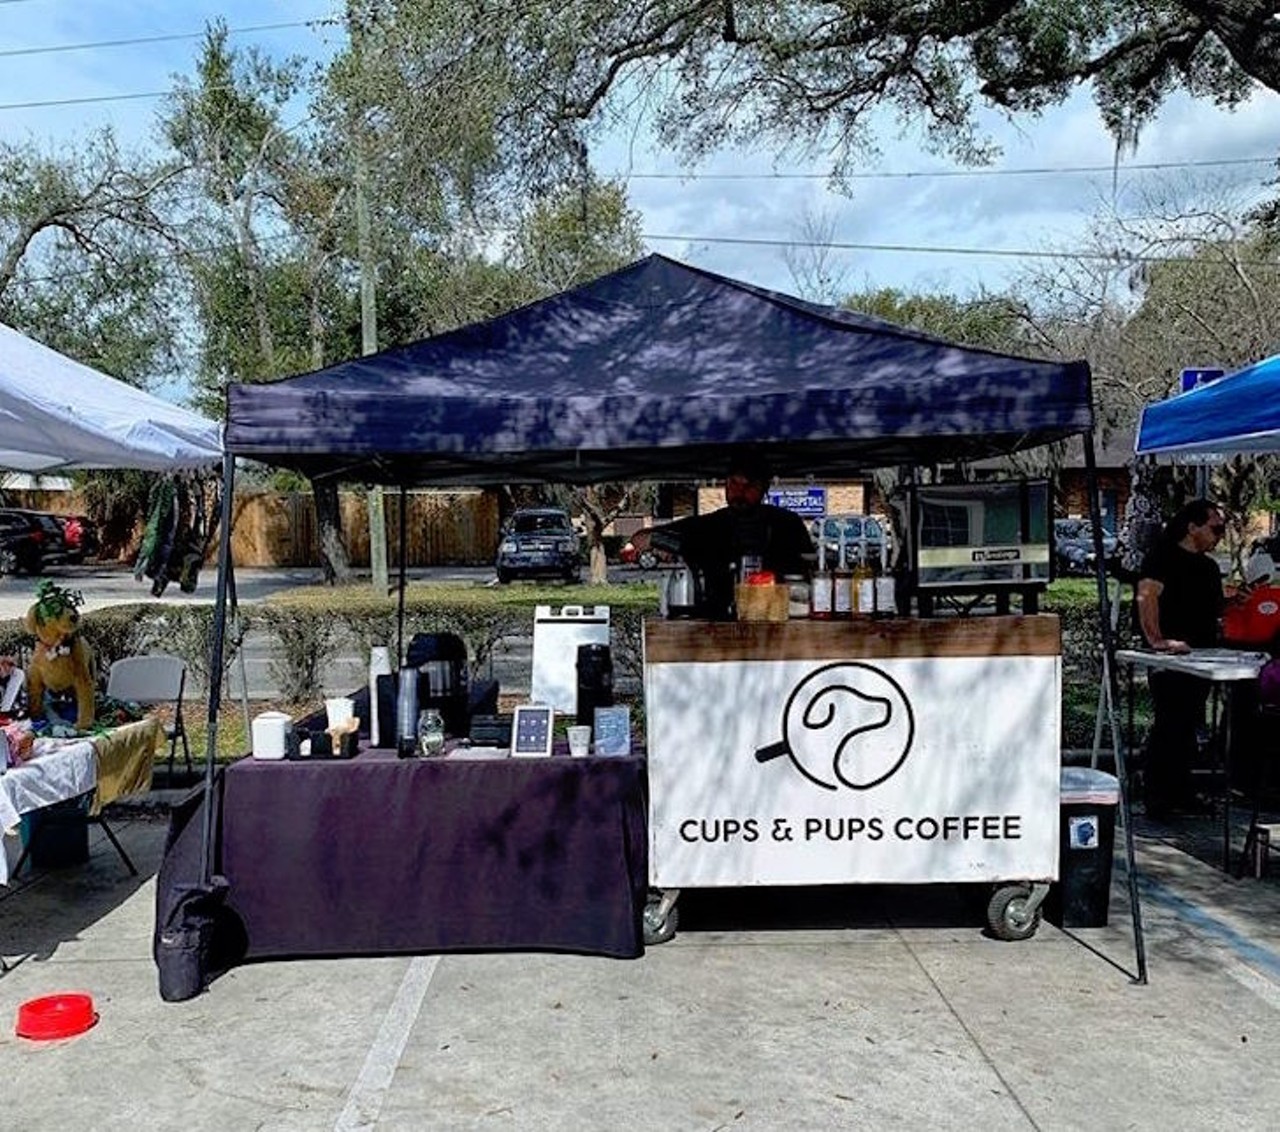 Cups and Pups Coffee  
While there is no permanent location for this coffee stop, you can get their coffee at local markets. They will be opening a dog park and coffee shop soon where you can get their speciality butter coffee any day you want. 
Photo via Facebook/Cups and Pups Coffee.